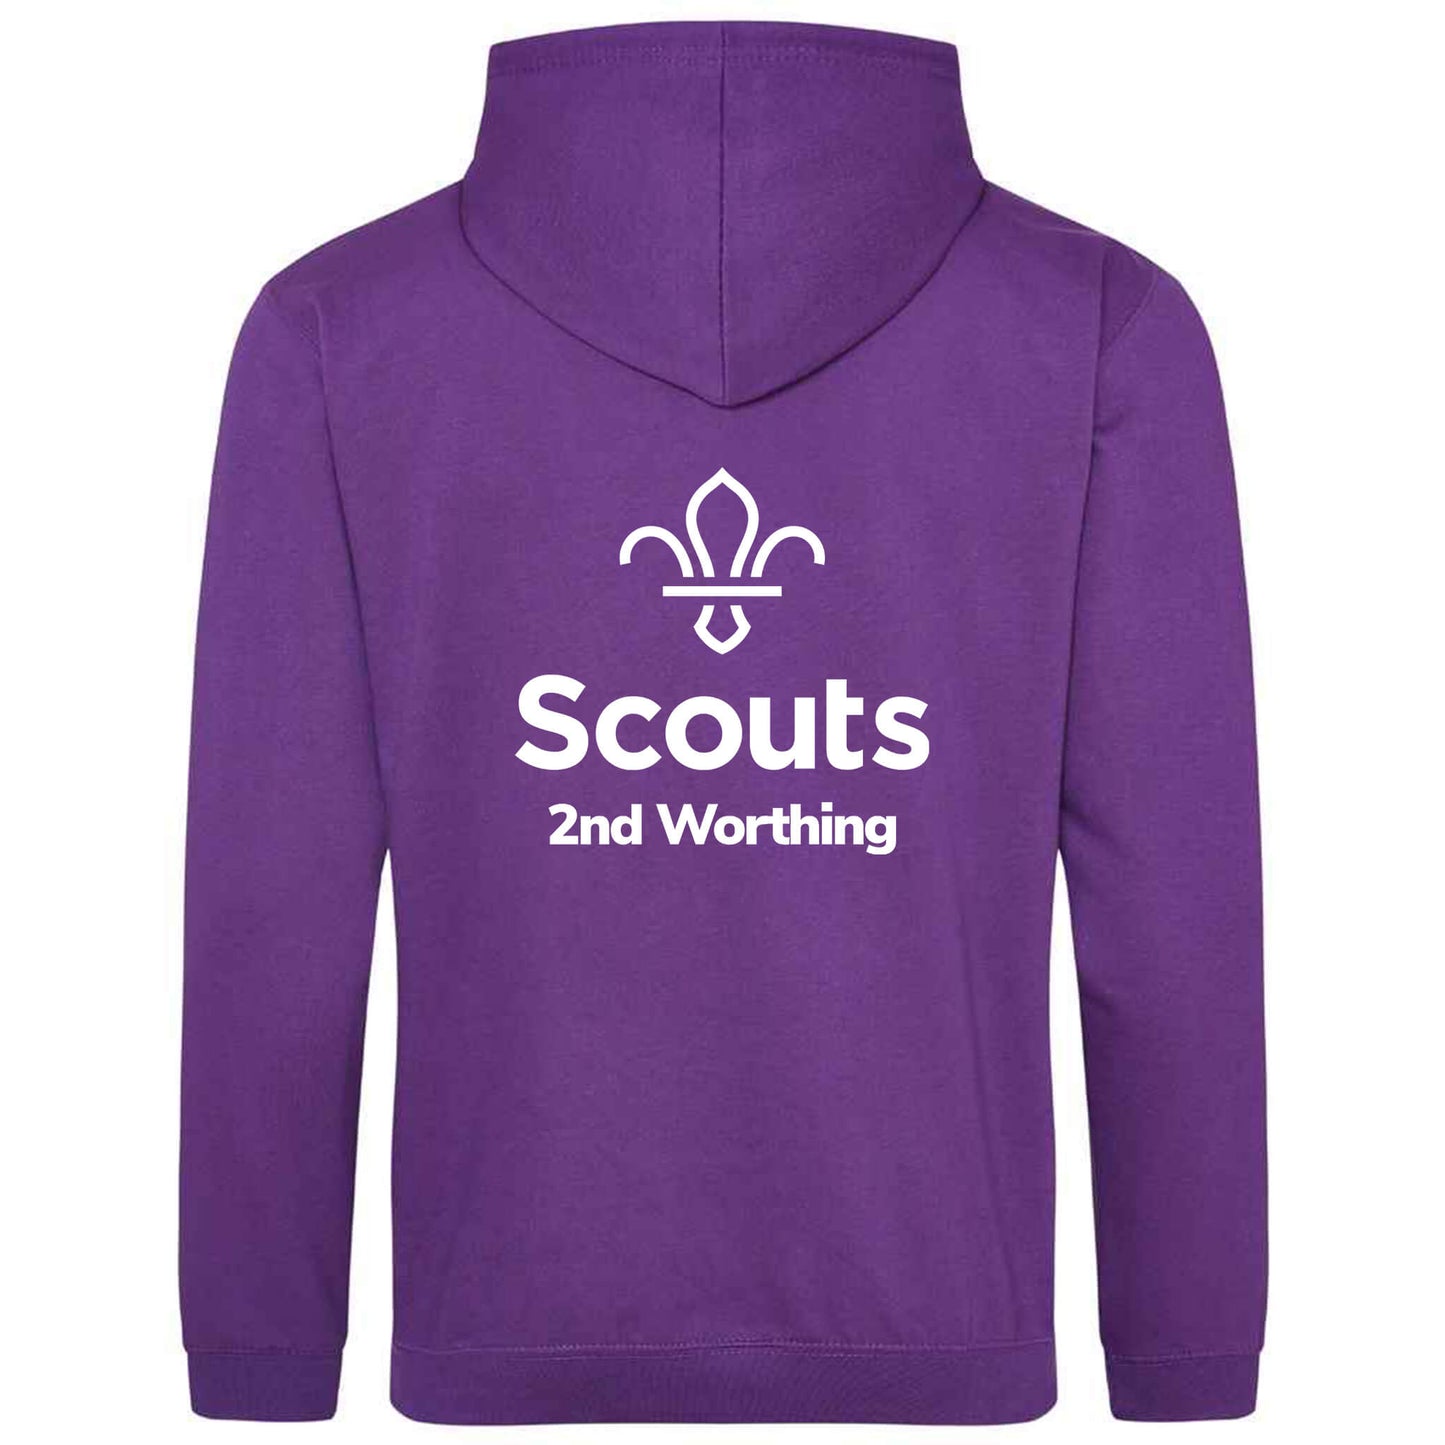 2nd Worthing Scouts Embroidered Hoodie Youth Size